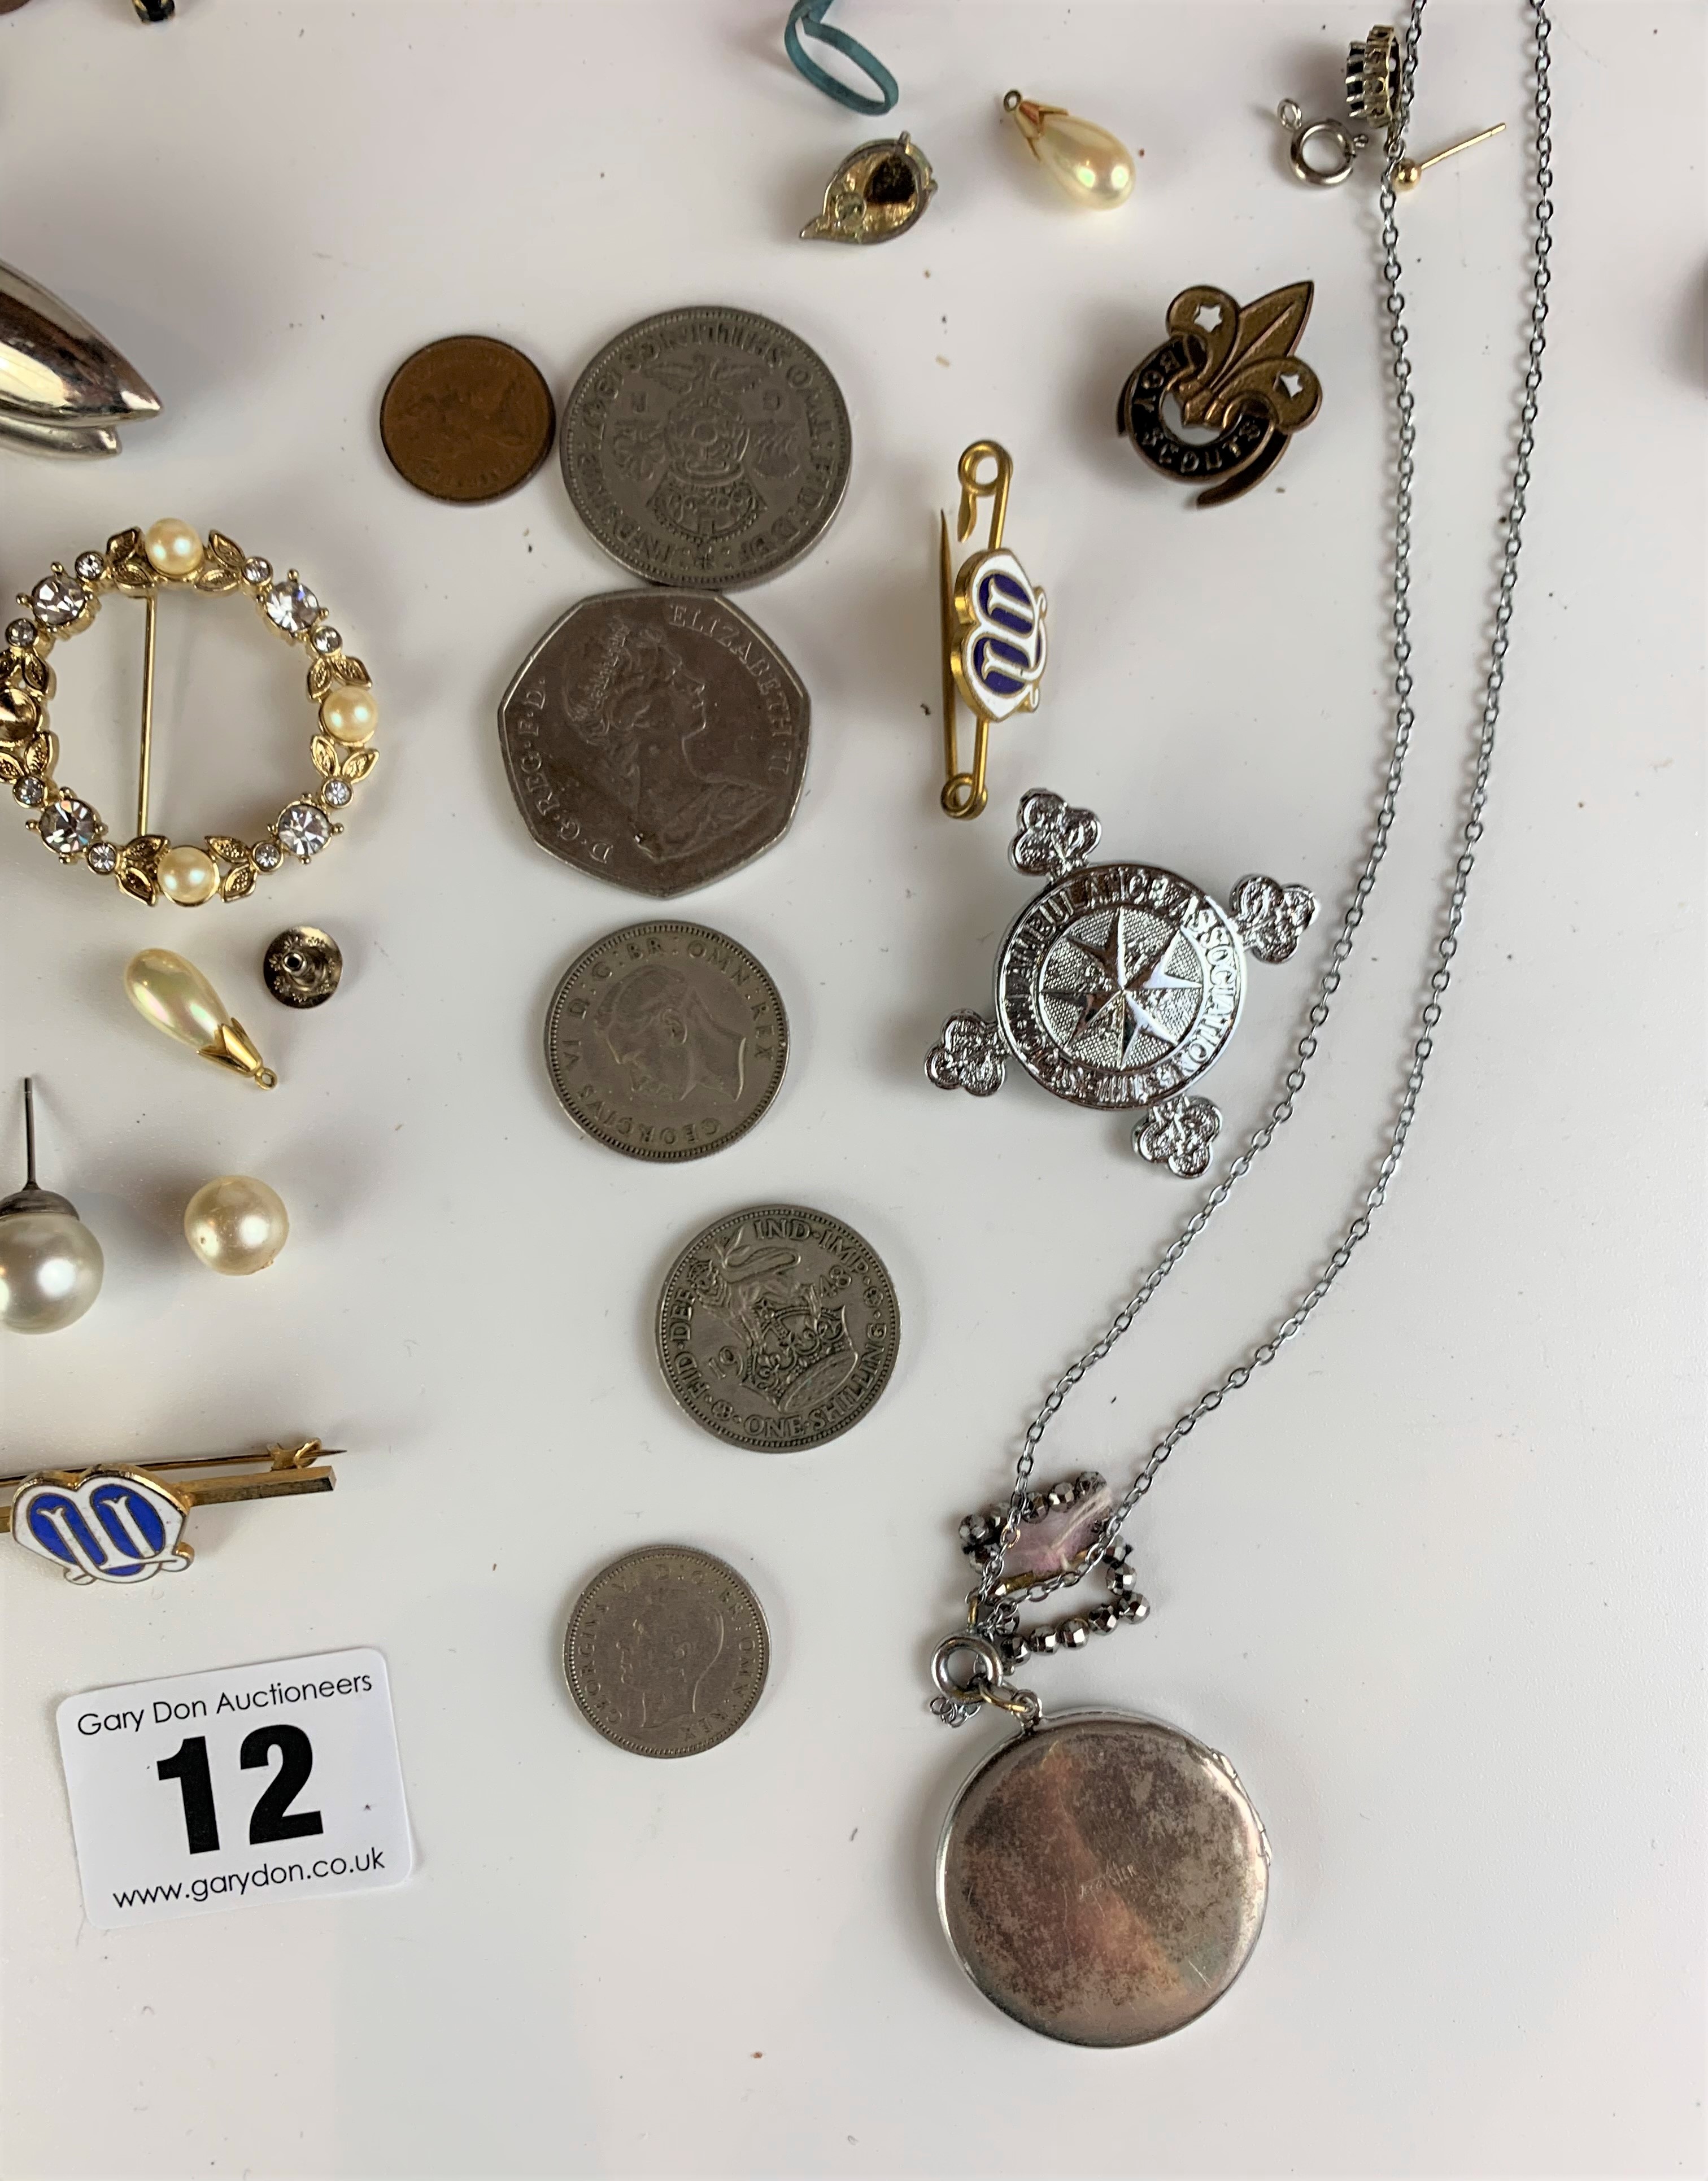 Dress jewellery including brooches, earrings, rings, souvenir spoon, odd coins and Azur watch - Image 7 of 9